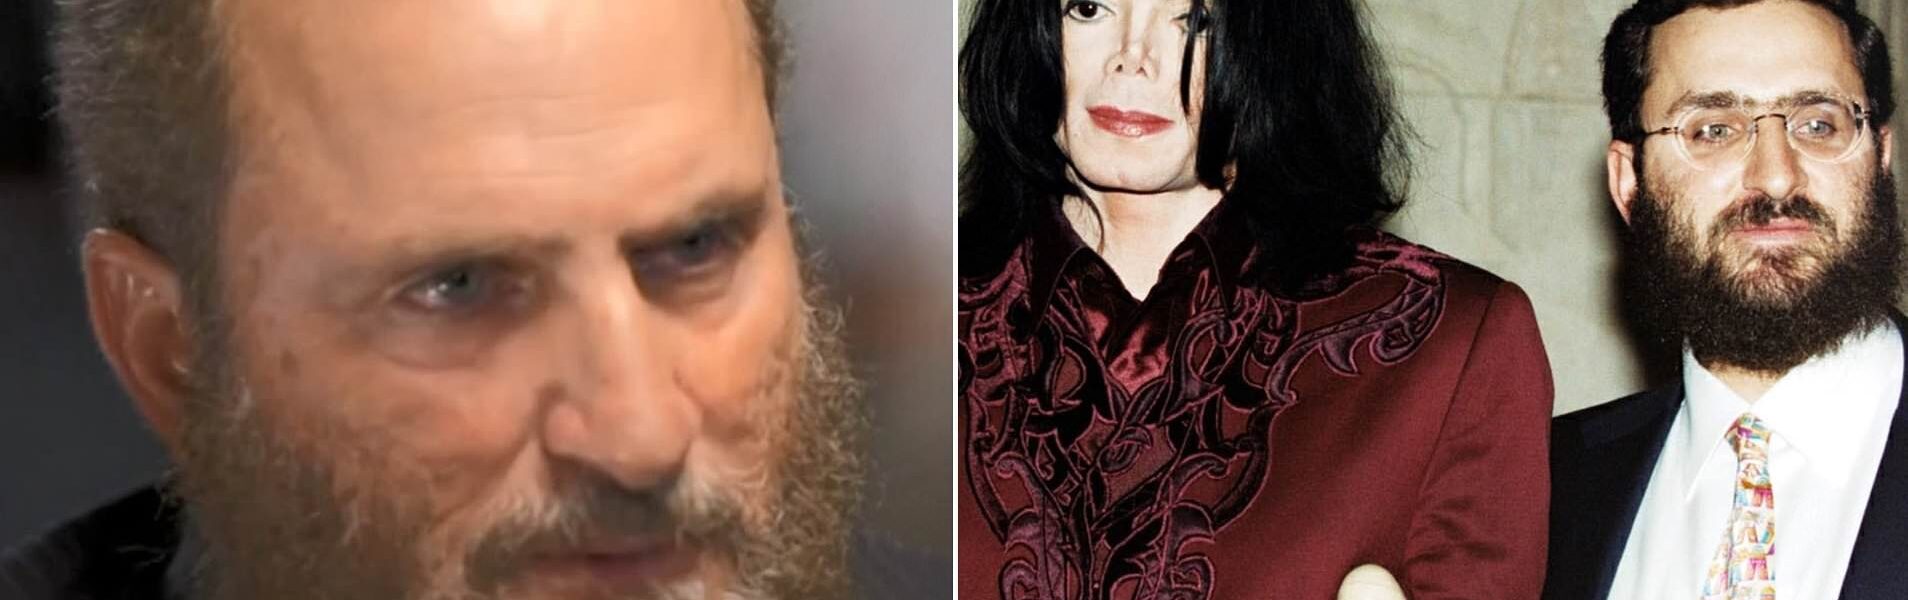 ‘I couldn’t believe he did it’: Rabbi and former close friend of Michael Jackson says he felt ‘sick’ when he saw footage of the late pop star justifying sleeping with children – and reveals the moment he knew the accusations were real